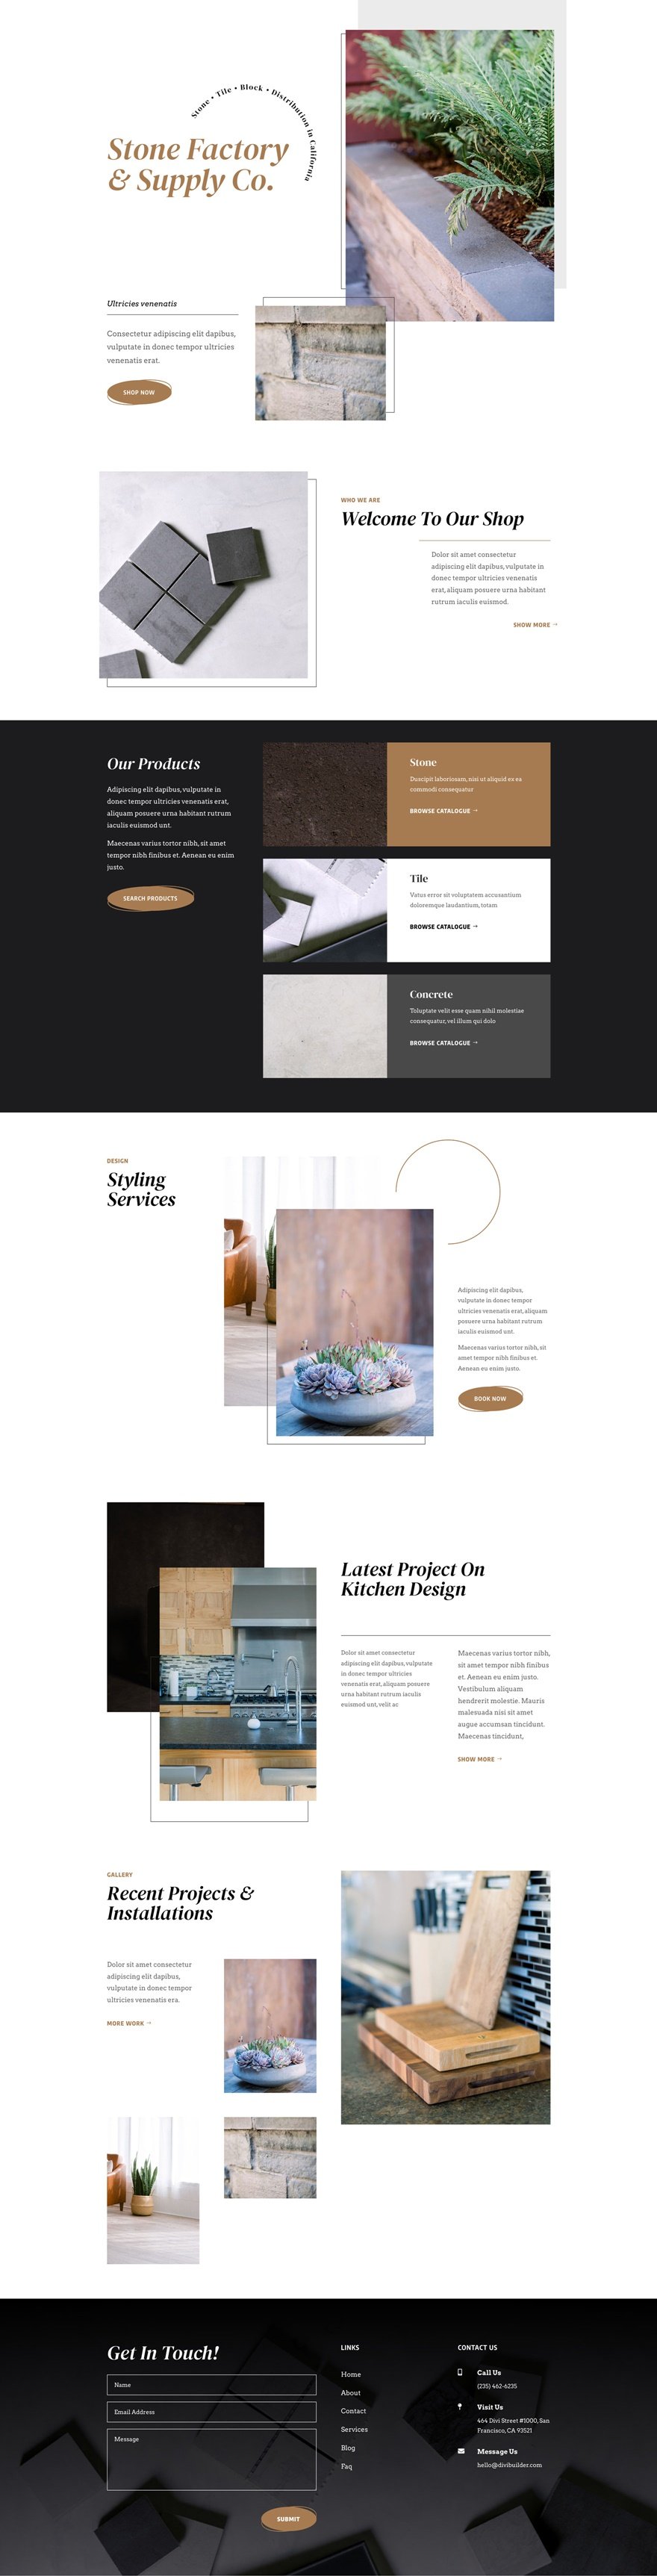 get-a-free-stone-factory-layout-pack-for-divi-1 獲得 Divi 的免費 Stone Factory Layout Pack